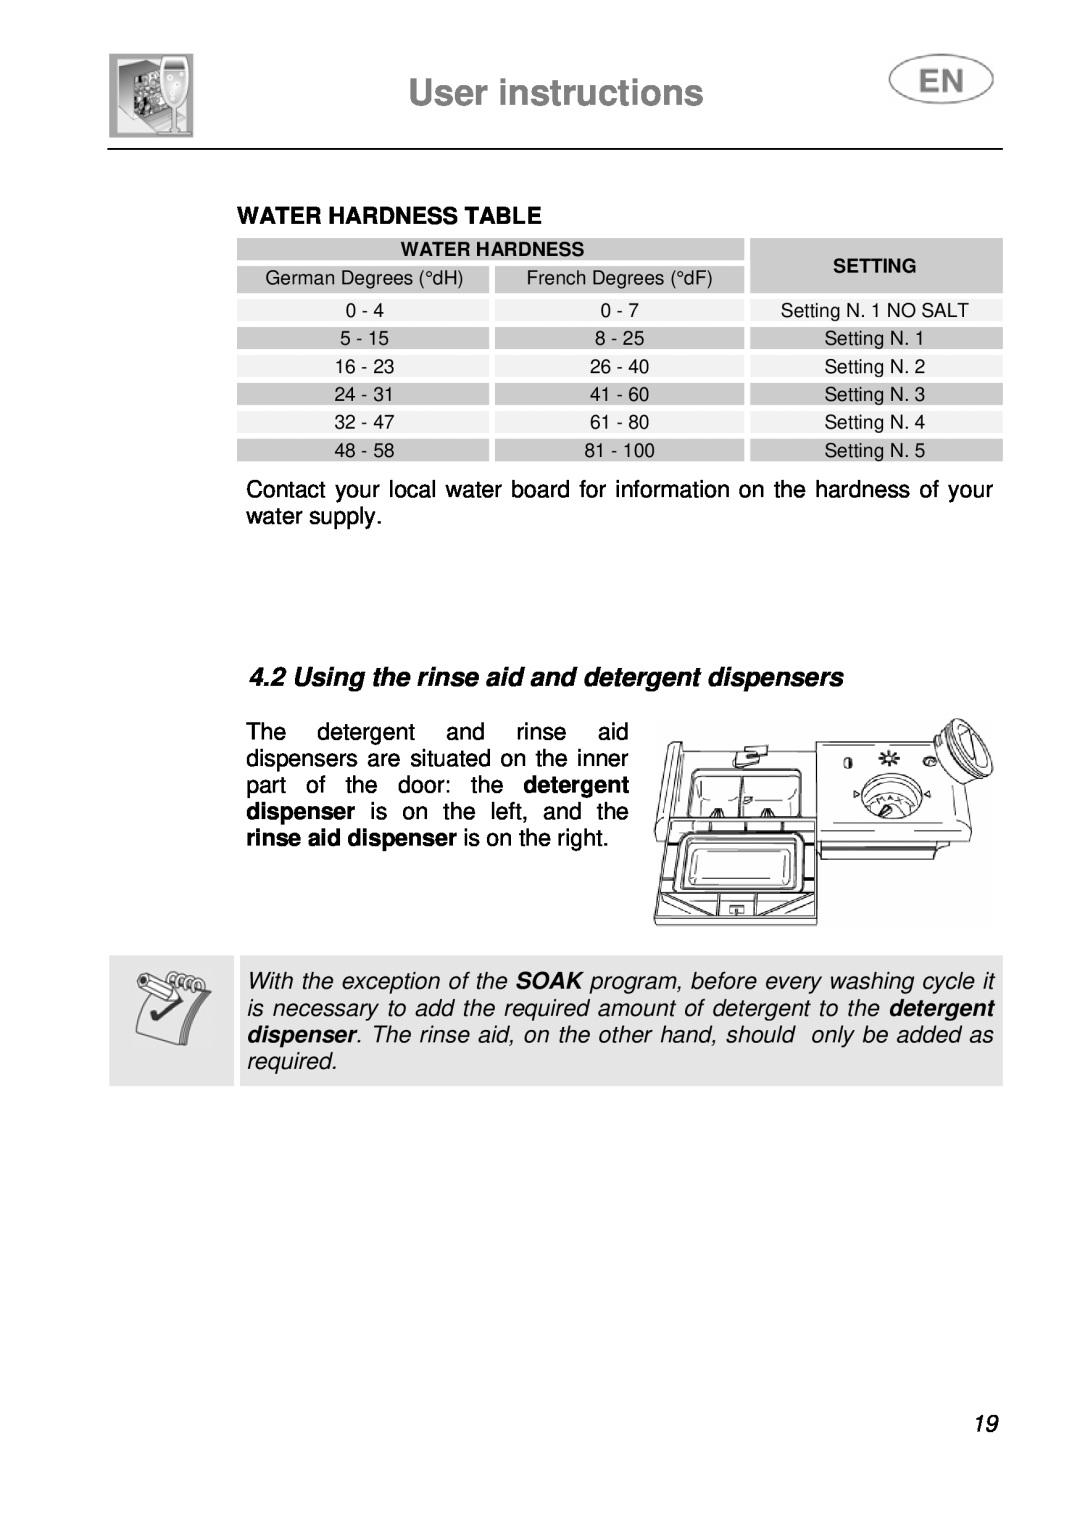 Smeg LSA14X7 instruction manual User instructions, Using the rinse aid and detergent dispensers, Water Hardness Table 